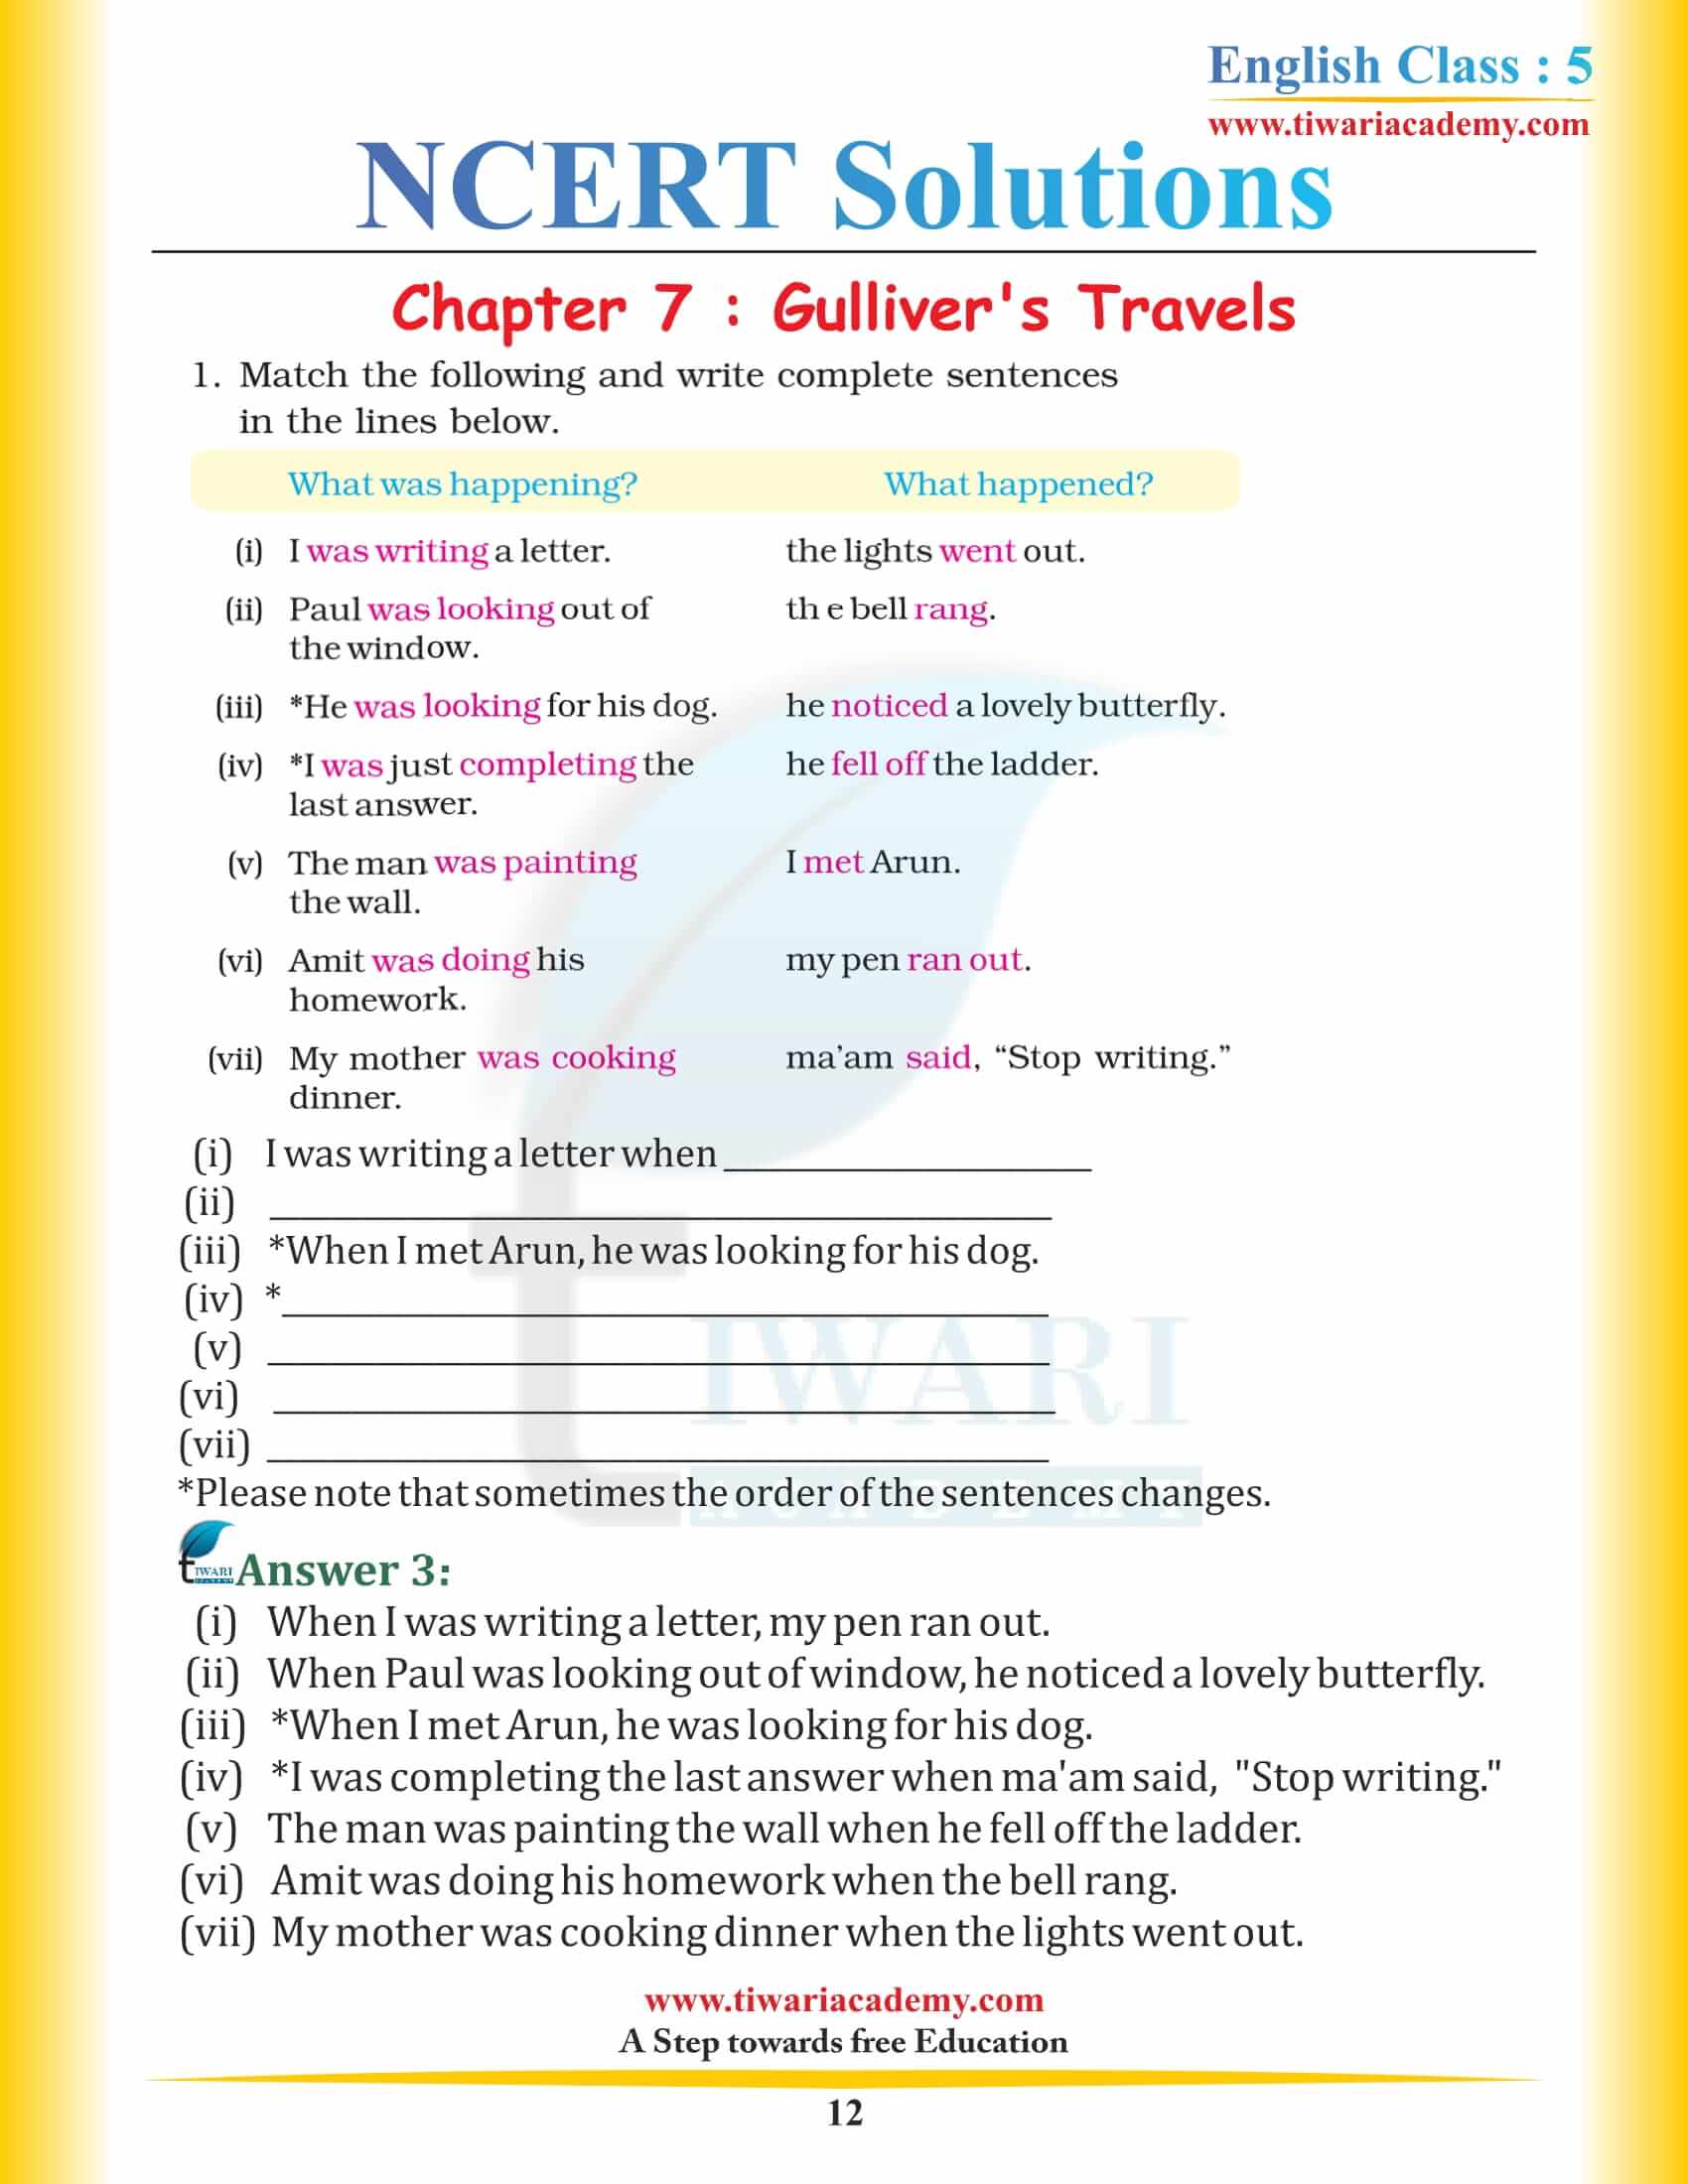 NCERT Solutions for Class 5 English Chapter 7 Gulliver’s Travels free download